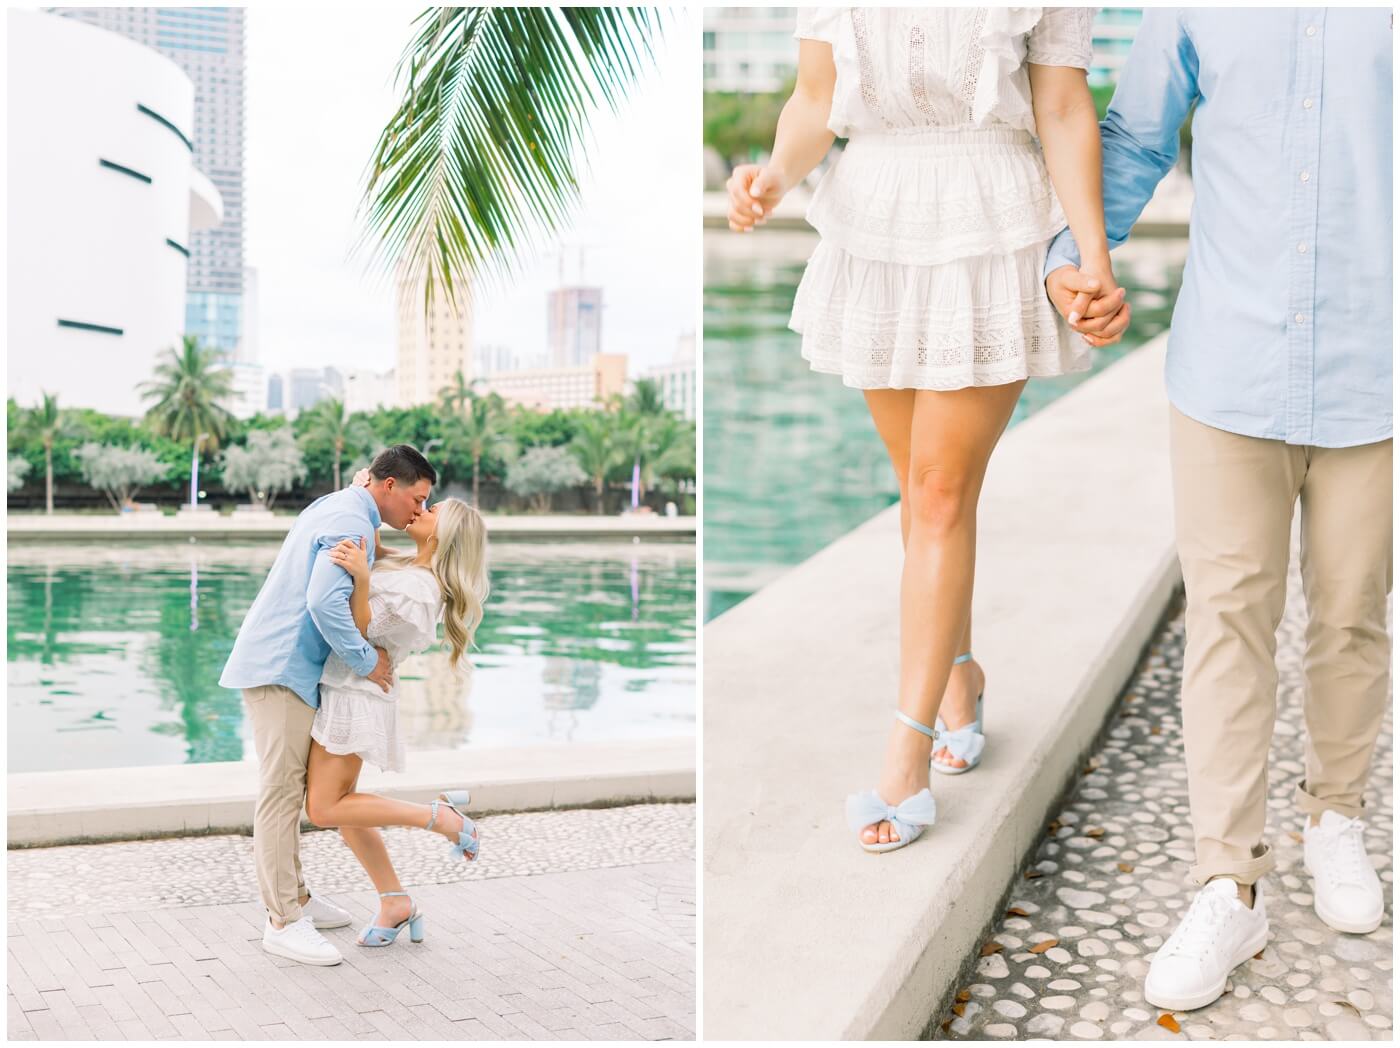 Couple walks together in downtown Miami